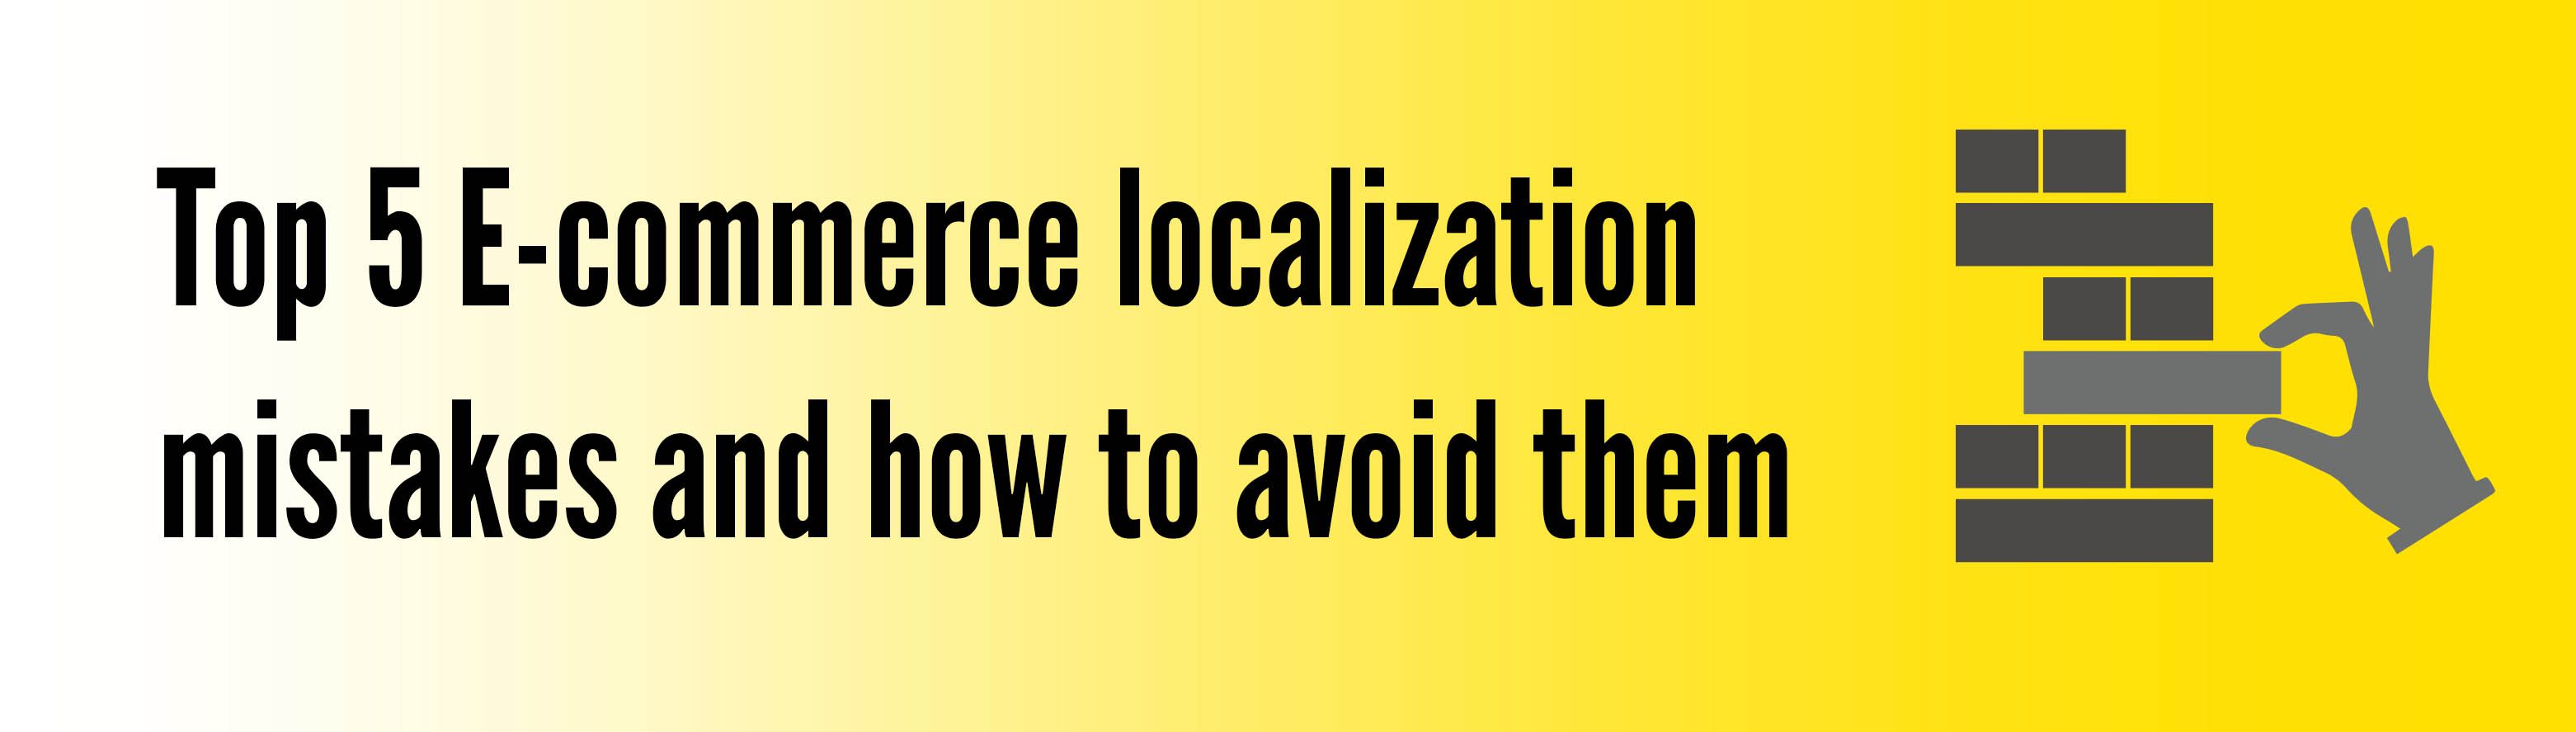 Top 5 E-commerce Localization Mistakes and how to Avoid Them